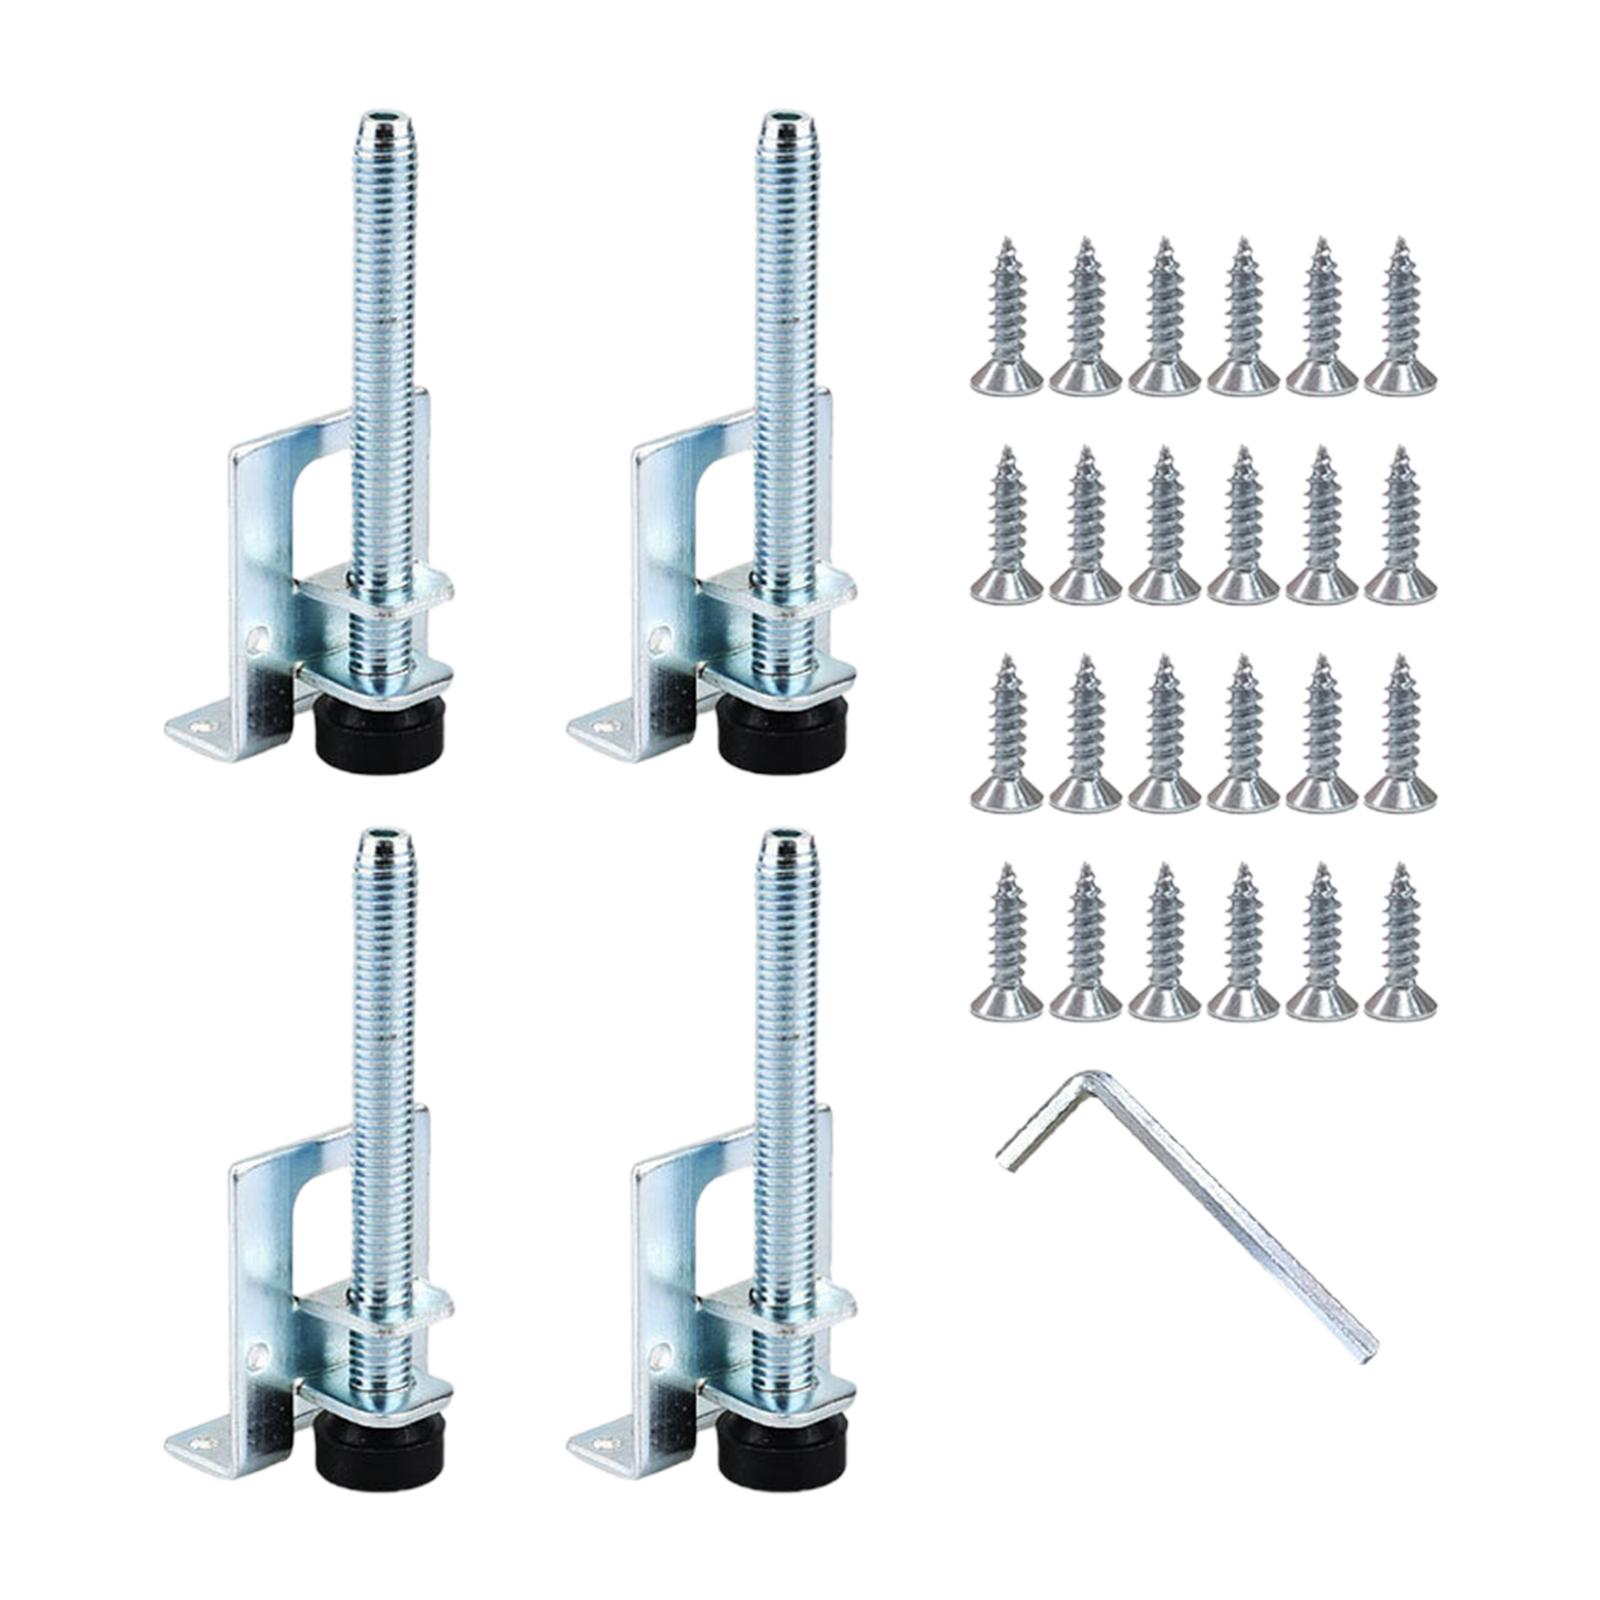 4 Pieces Furniture Leveler Legs Adjustable Supporting Feet for Sofa Couch B